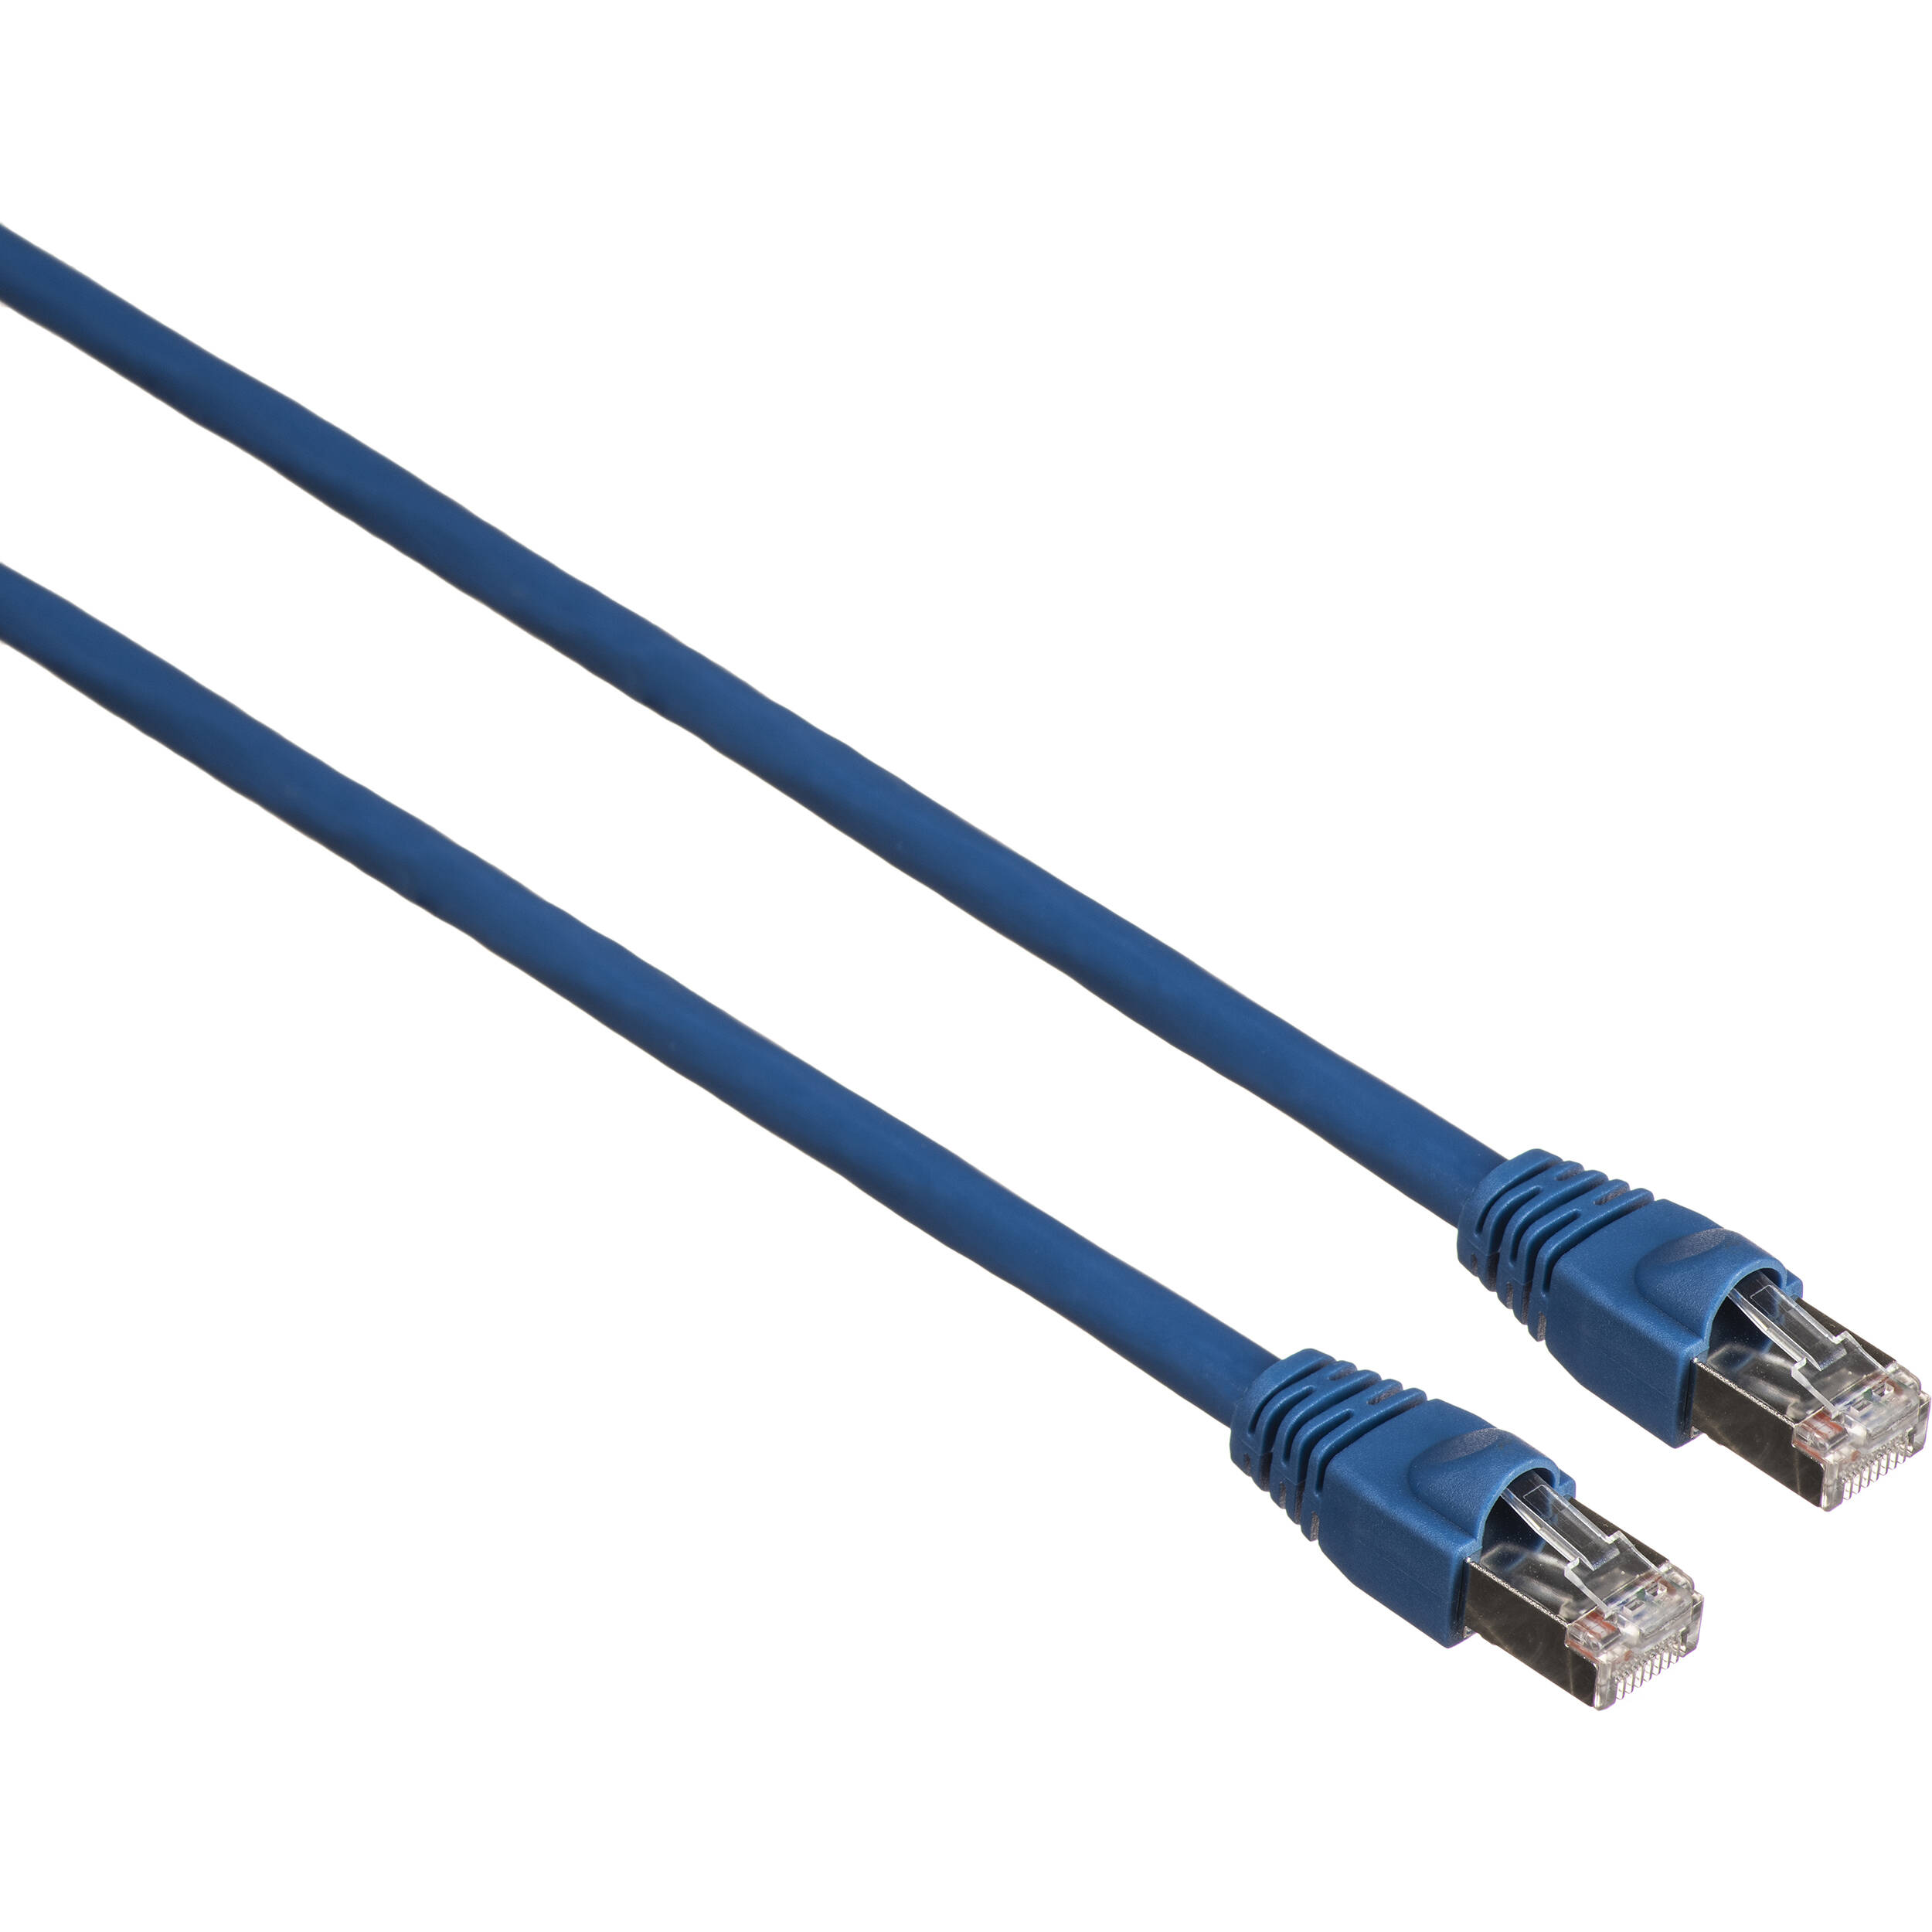 Comprehensive CAT6a Shielded Patch Cable (75', Blue Finish)